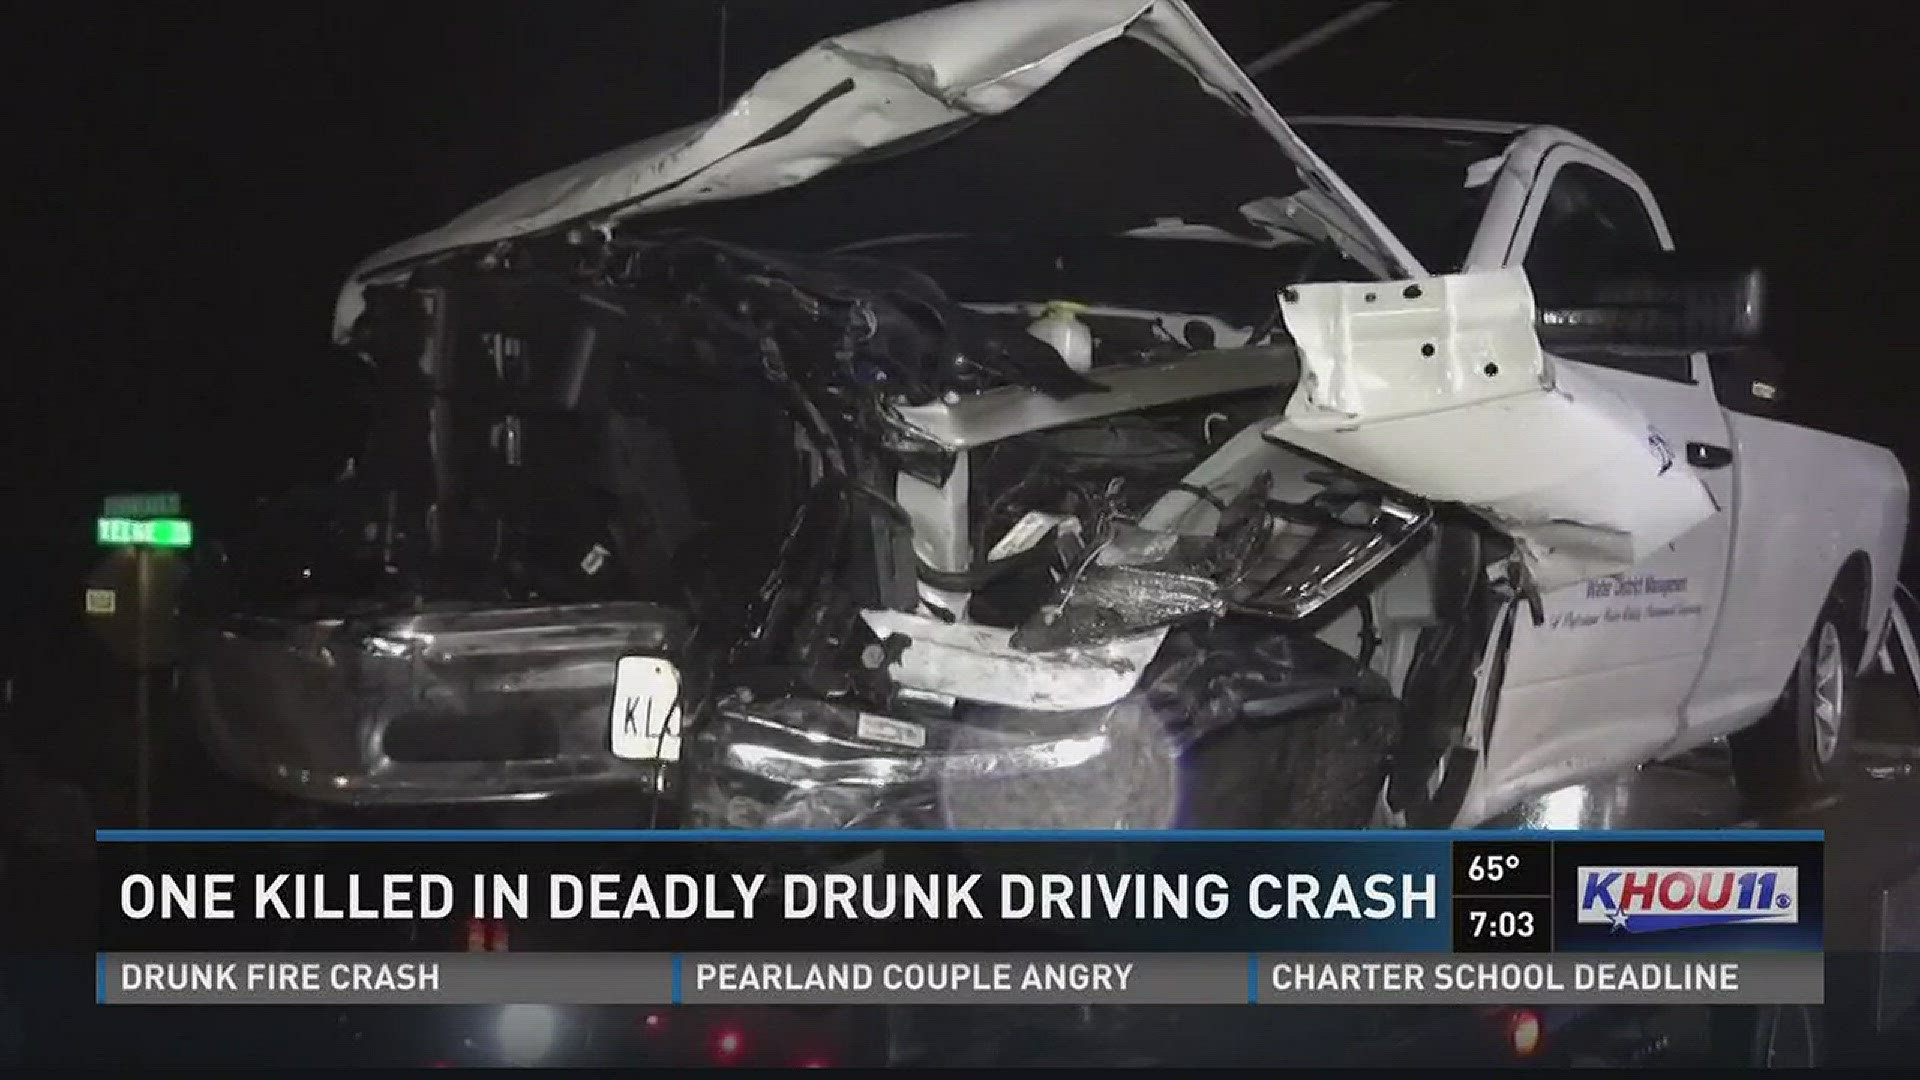 A drunk driver caused a fatal crash in northwest Harris County late Friday night, deputies say.